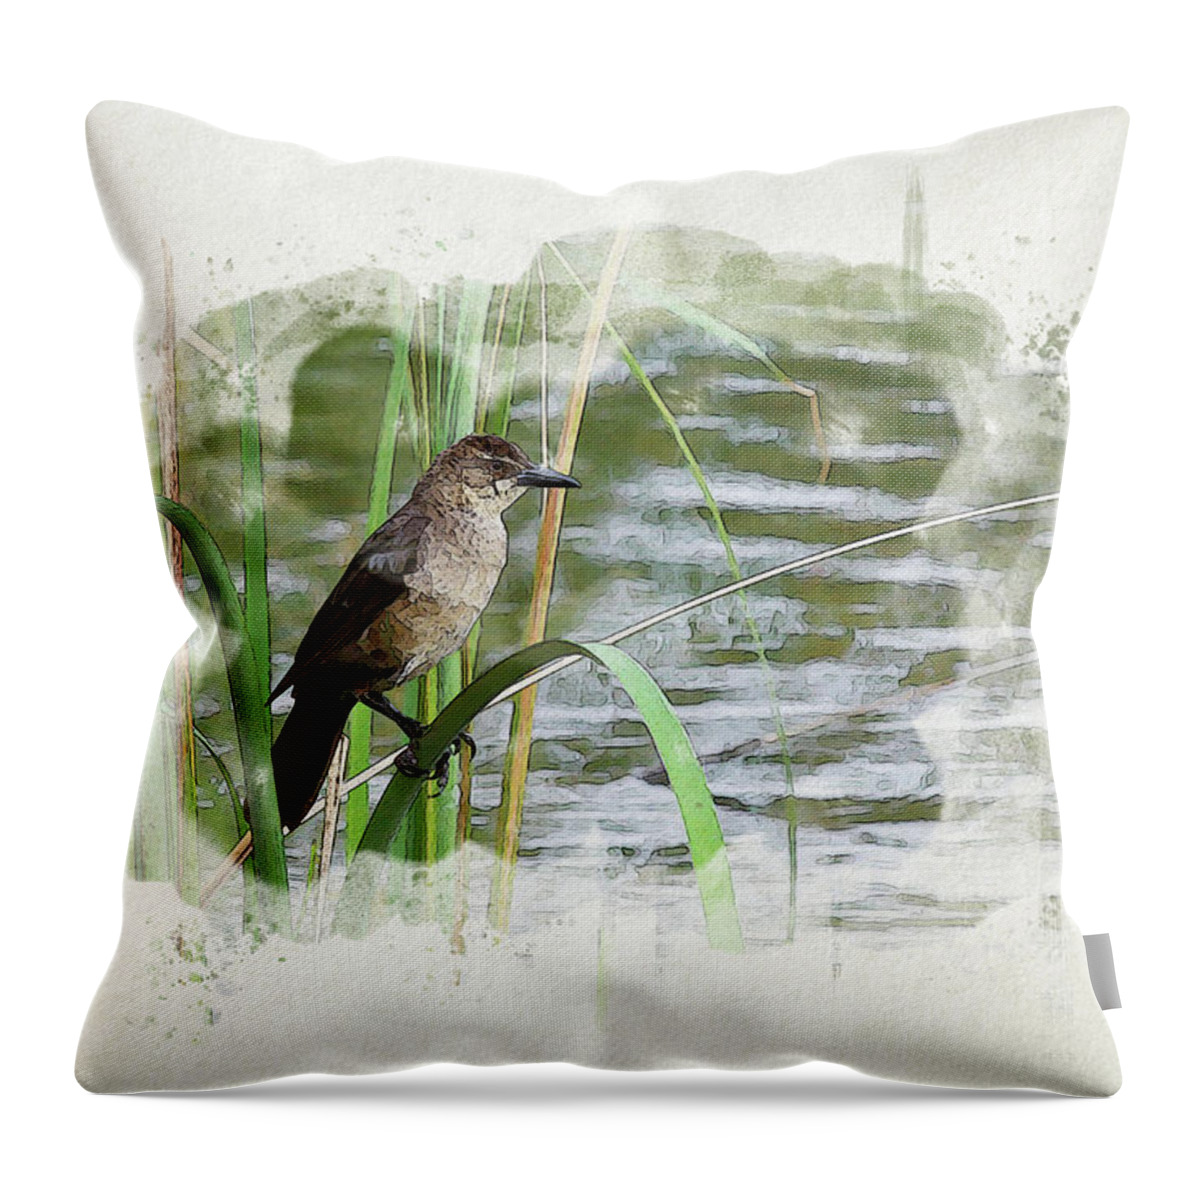 Grackle Throw Pillow featuring the digital art Grackle by the Lake by Alison Frank